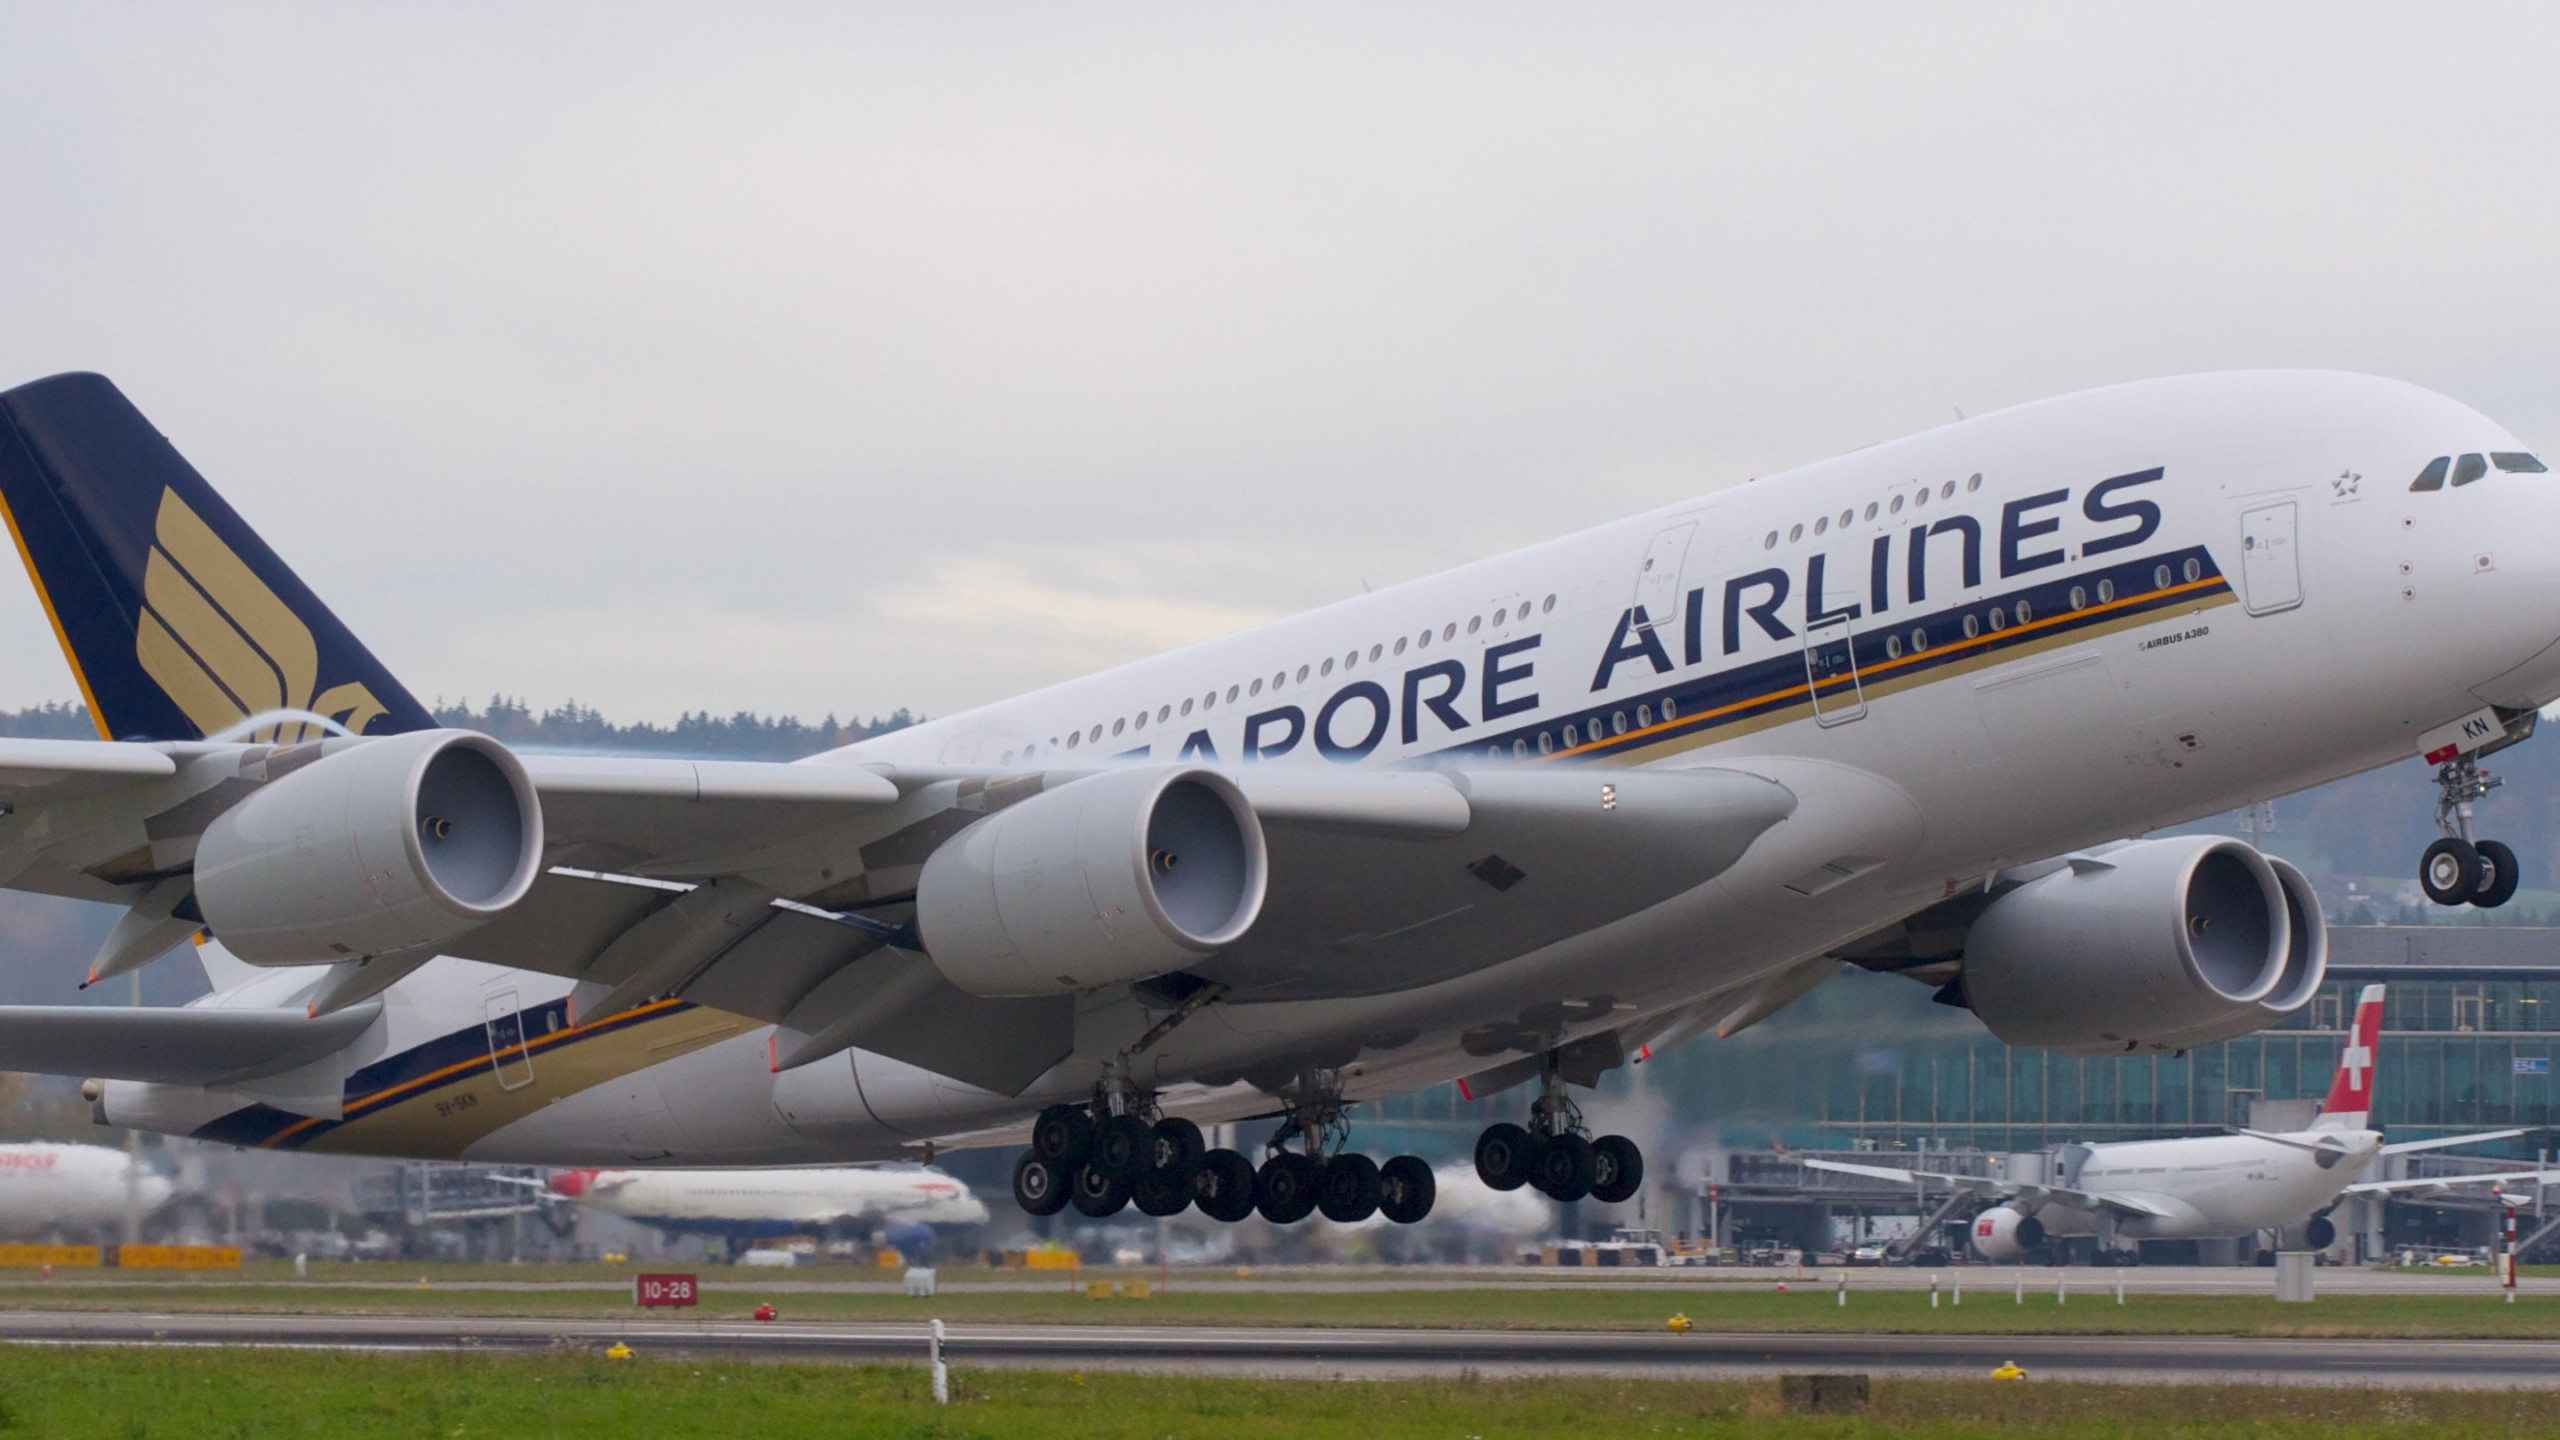 Passenger airplane from Singapore airlines wallpaper 2560x1440